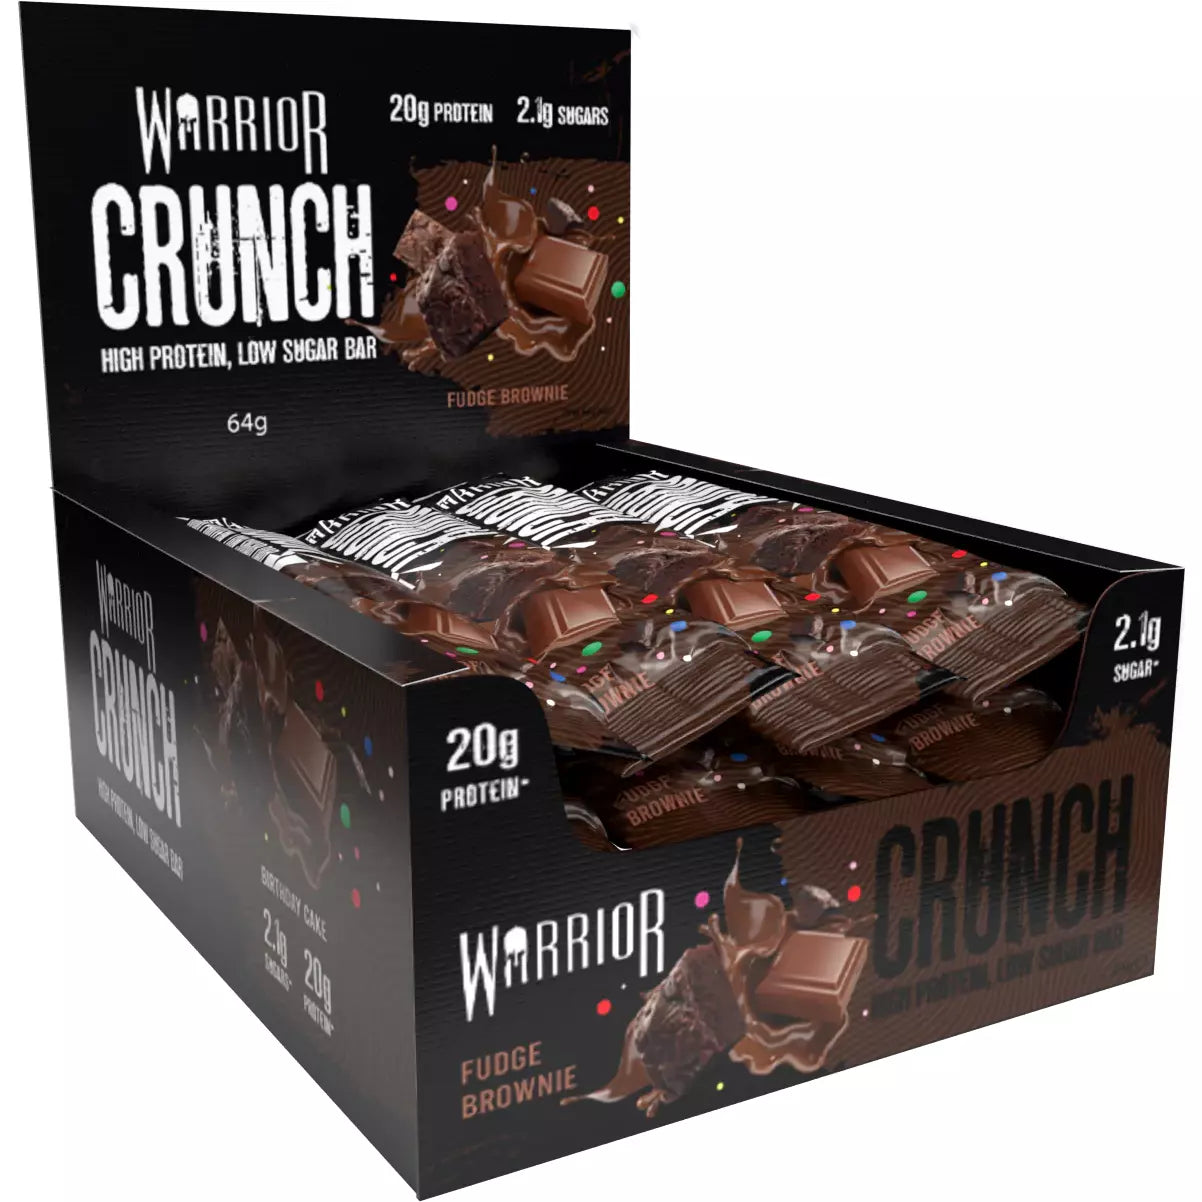 Warrior Crunch Low-Carb Protein Bars (Box of 12) warrior-crunch-protein-bars-box-of-12 Protein Snacks Fudge Brownie warrior supplements